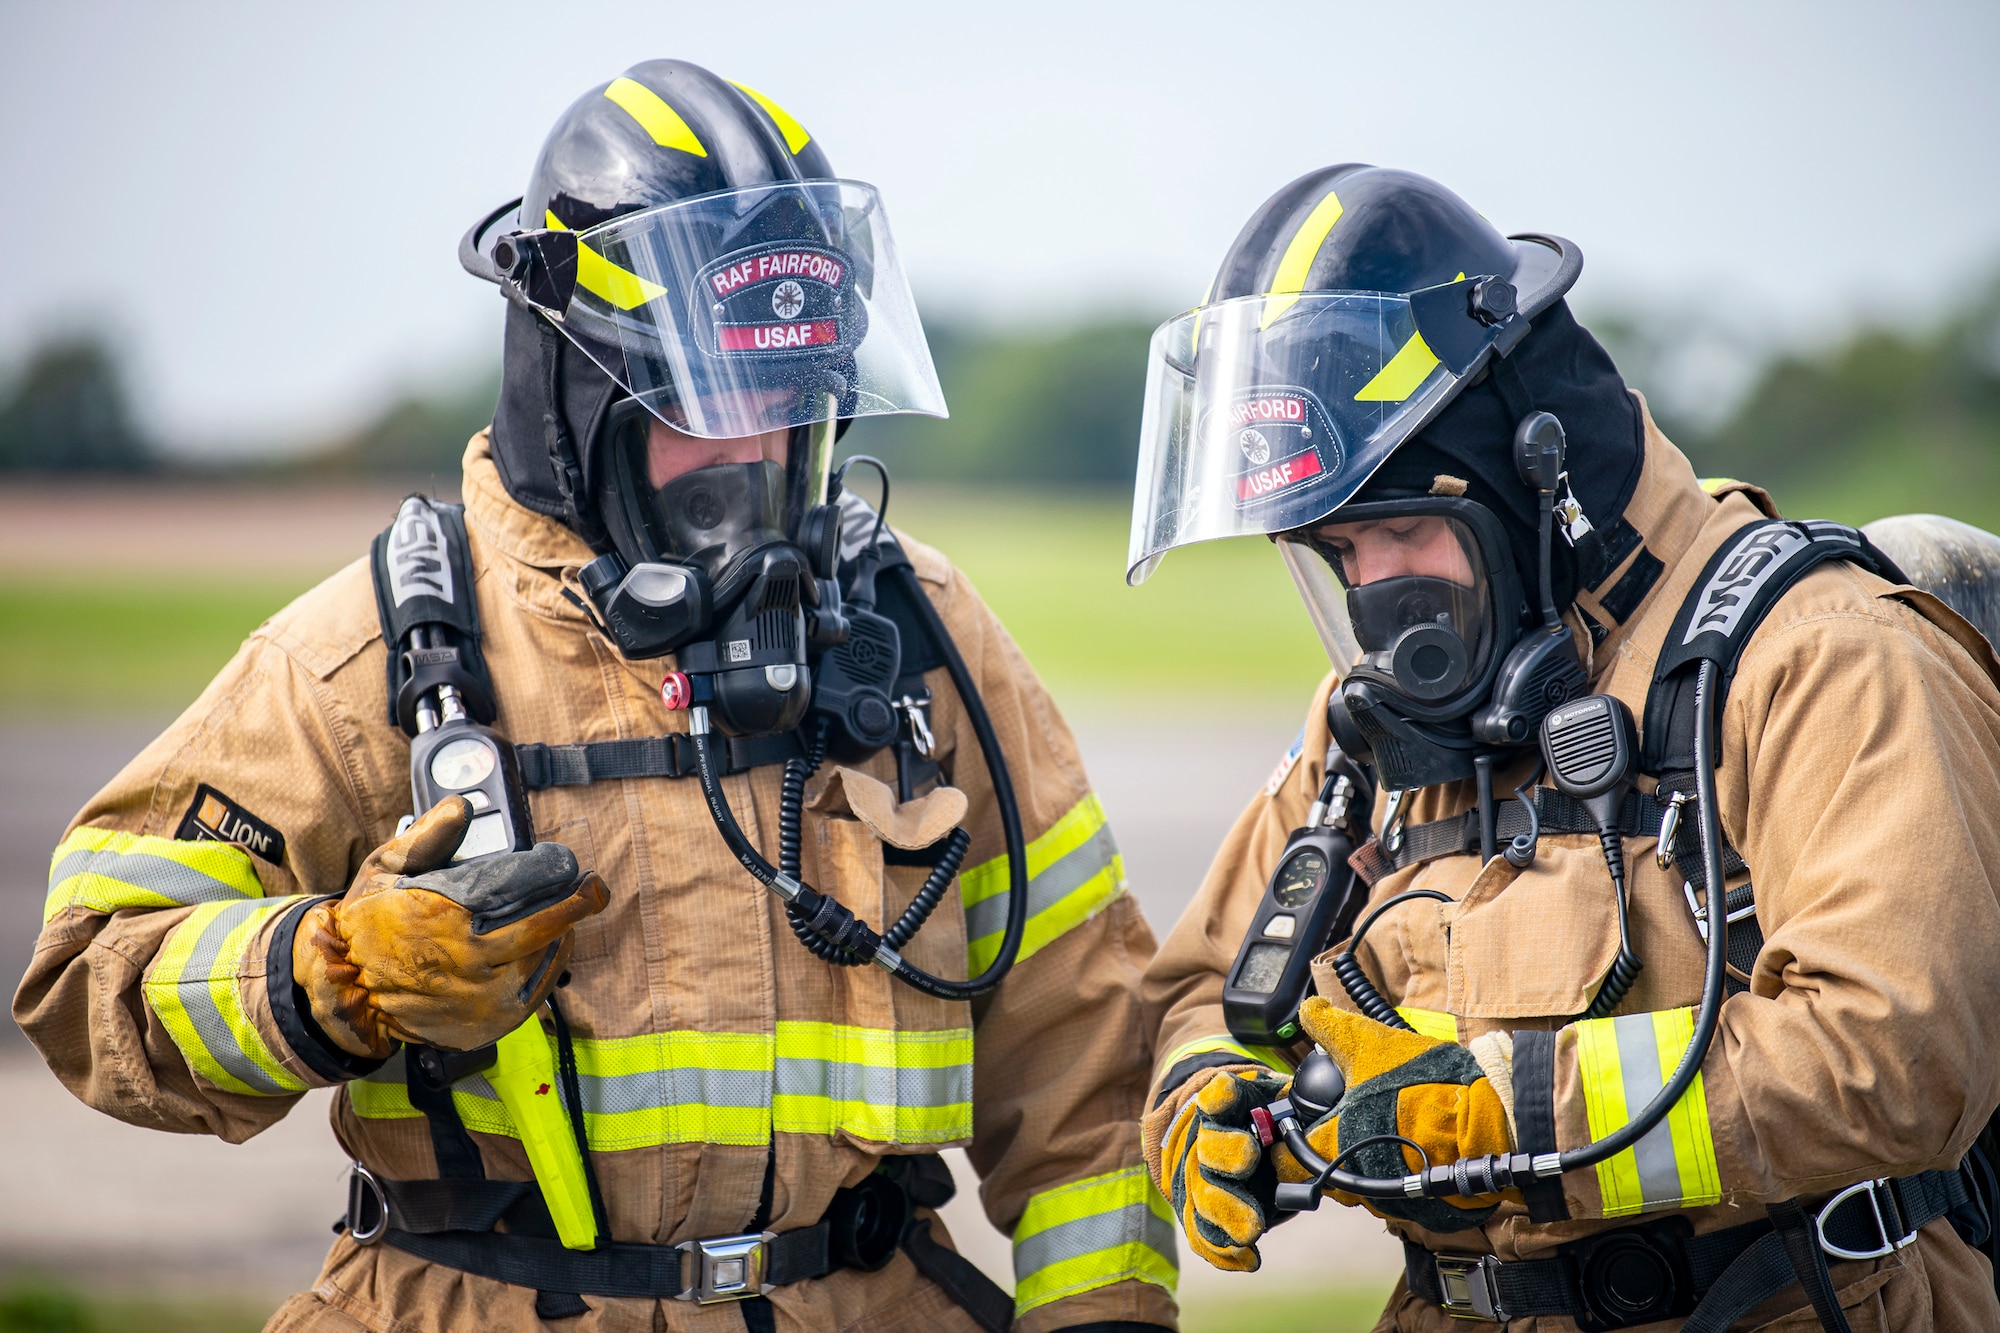 Firefighters from the 422d Fire Emergency Services, check their oxygen levels during a live-fire training exercise at RAF Fairford, England, Oct. 3, 2022. Firefighters from the 422d FES, are required to complete live-fire training bi-annually to test thief overall readiness and ability to properly extinguish an aircraft fire. (U.S. Air Force photo by Staff Sgt. Eugene Oliver)